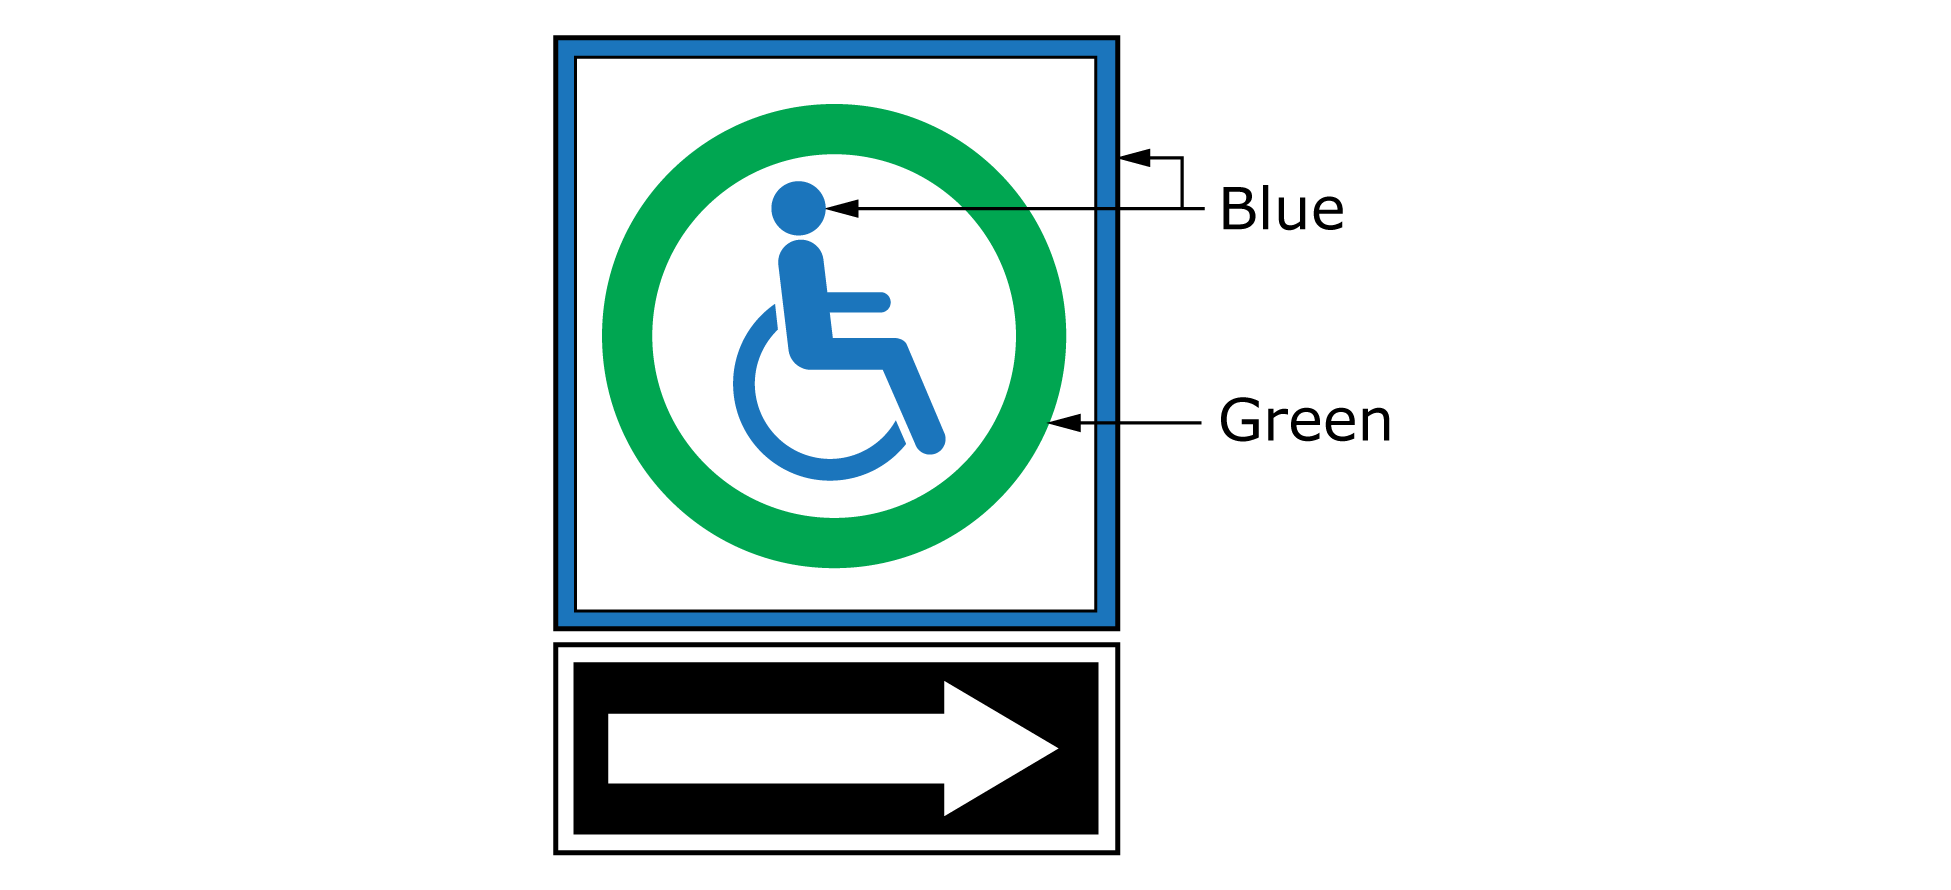 This example is a directional sign to parking spaces. There is a blue square with a green circle surrounding a blue illustration of a person in a wheelchair. The blue square is accompanied by a white arrow against a black background directly underneath. 